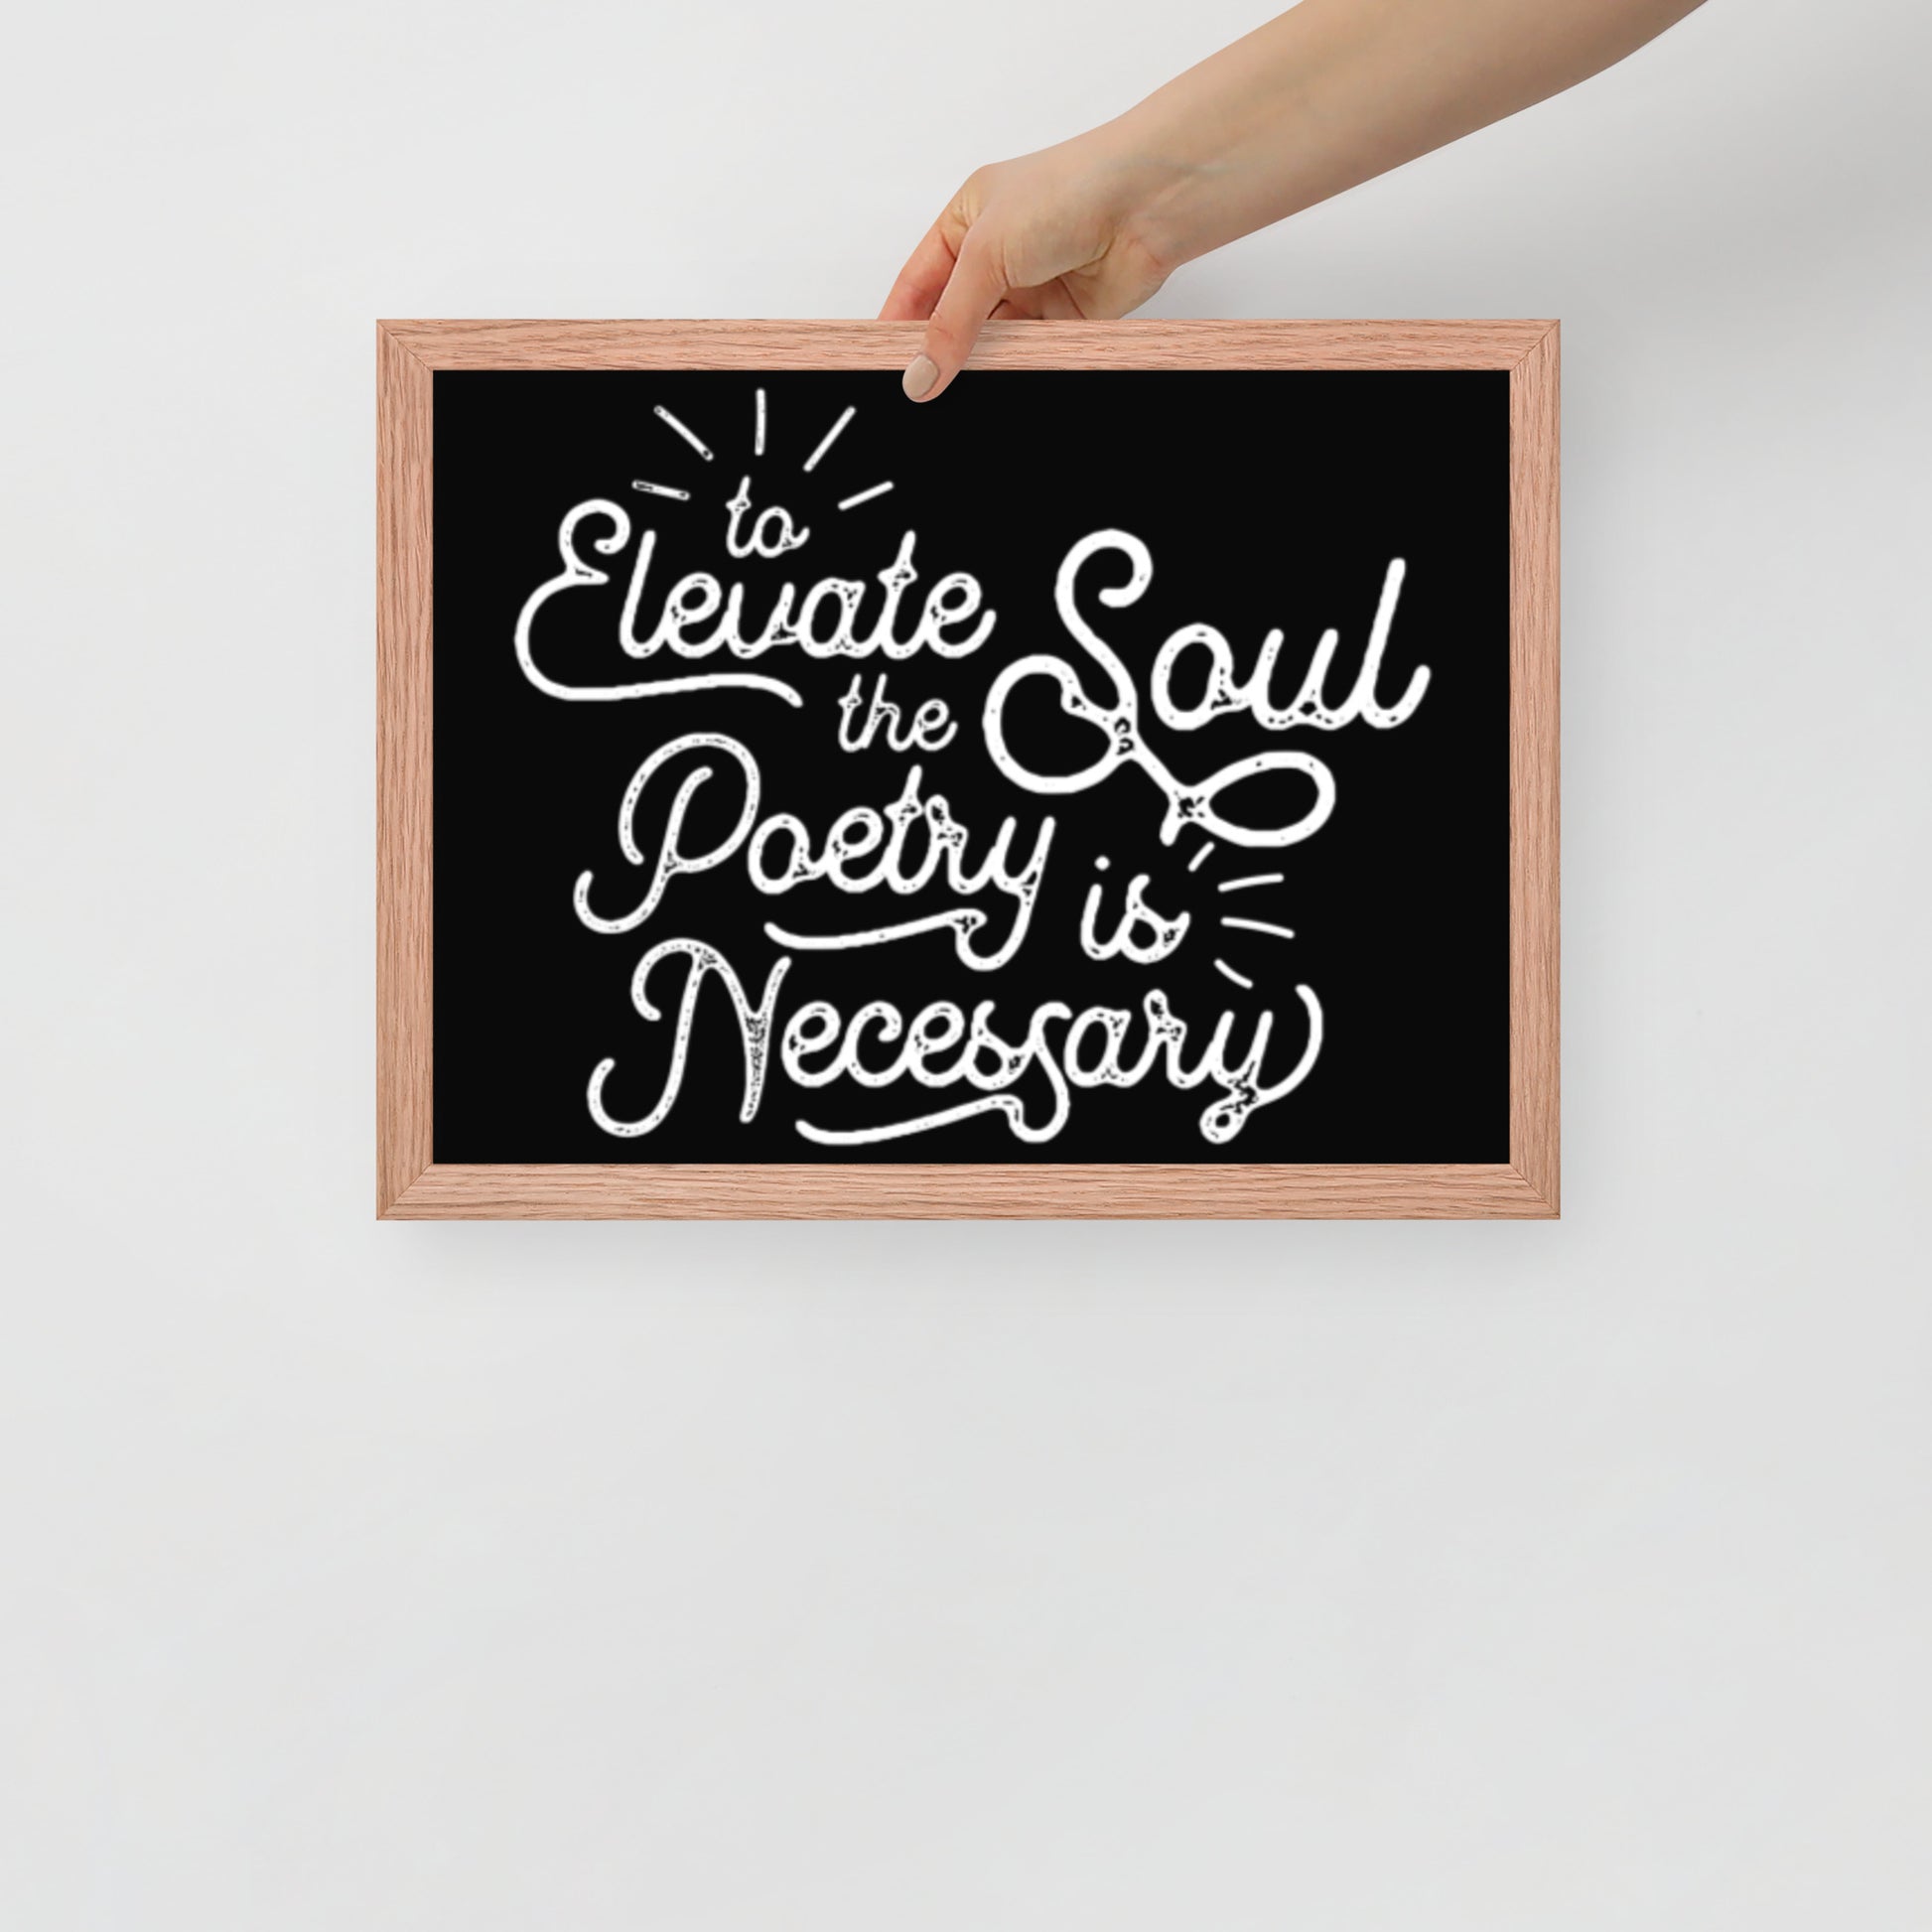 To Elevate the Soul Poetry is Necessary Framed Poster - 12 x 16 Red Oak Frame